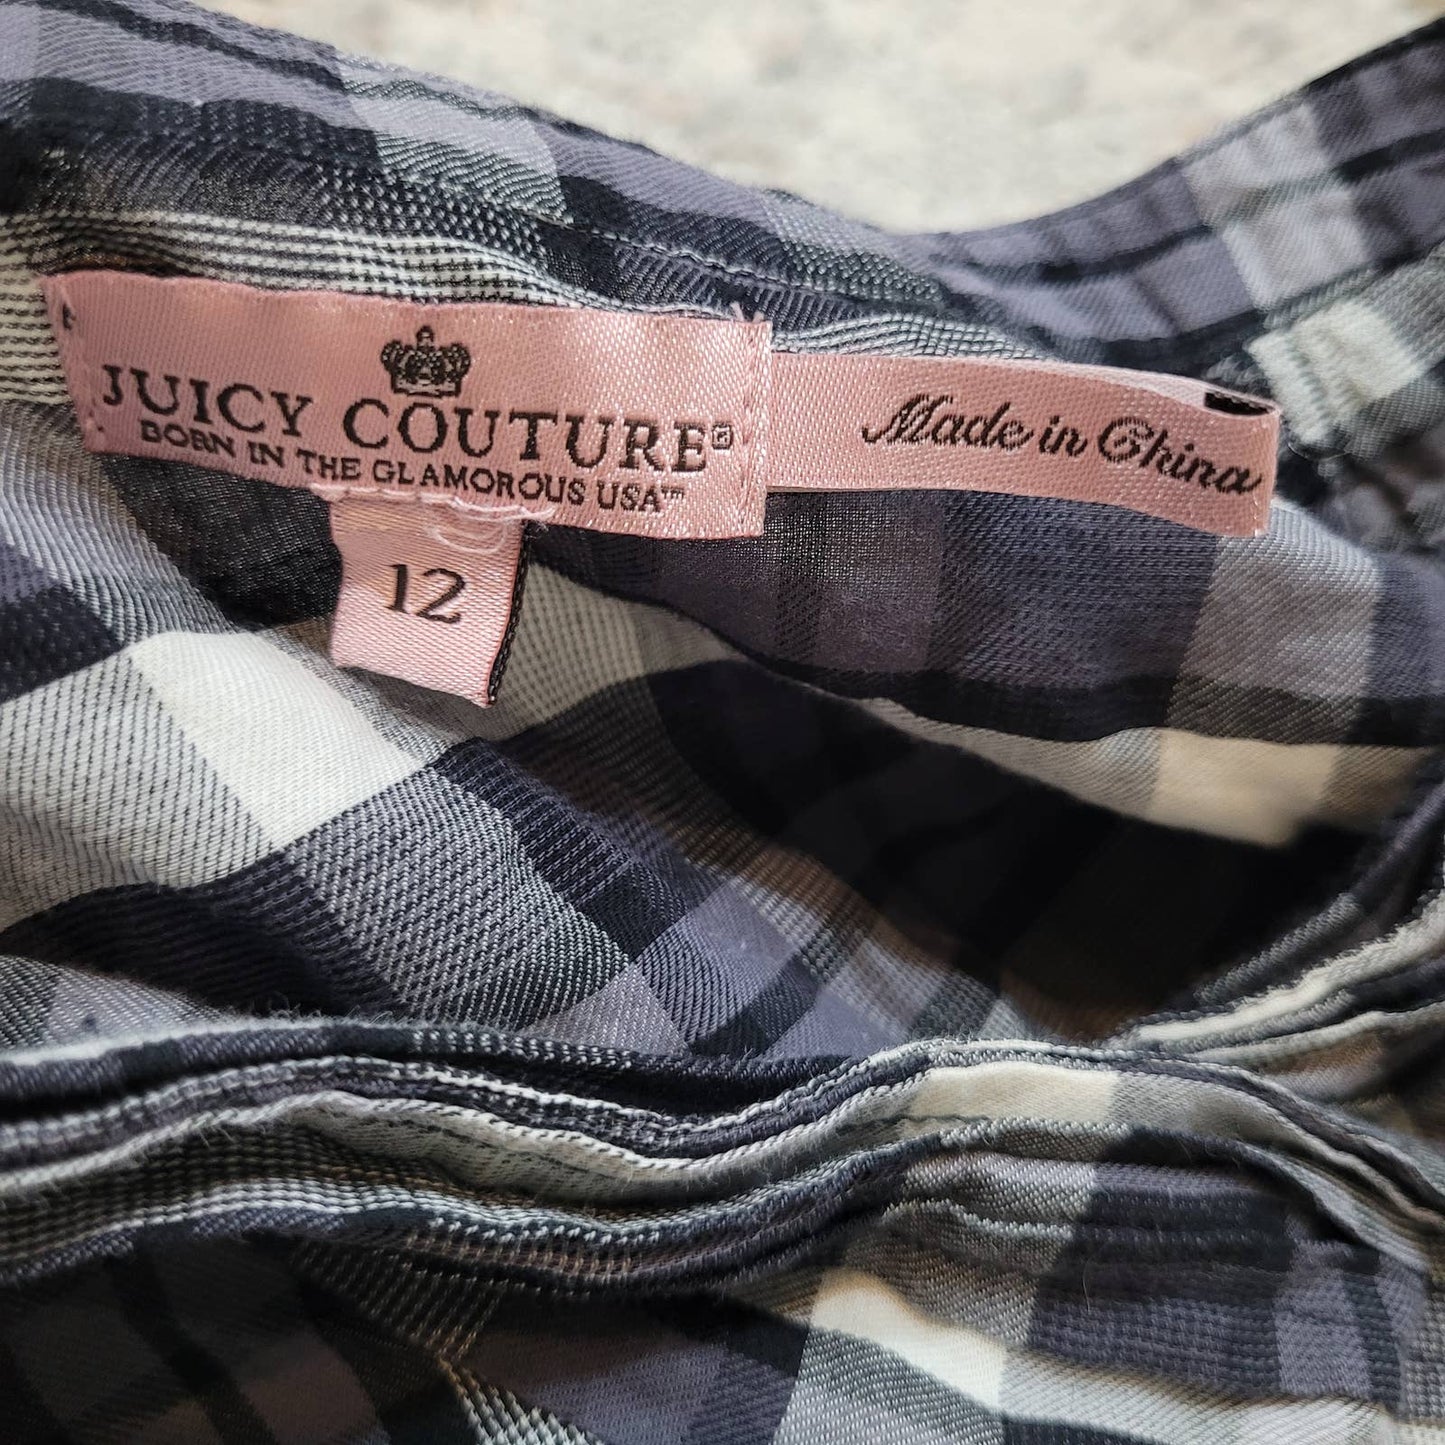 Juicy Couture Plaid Long Sleeve Dress - Size 12